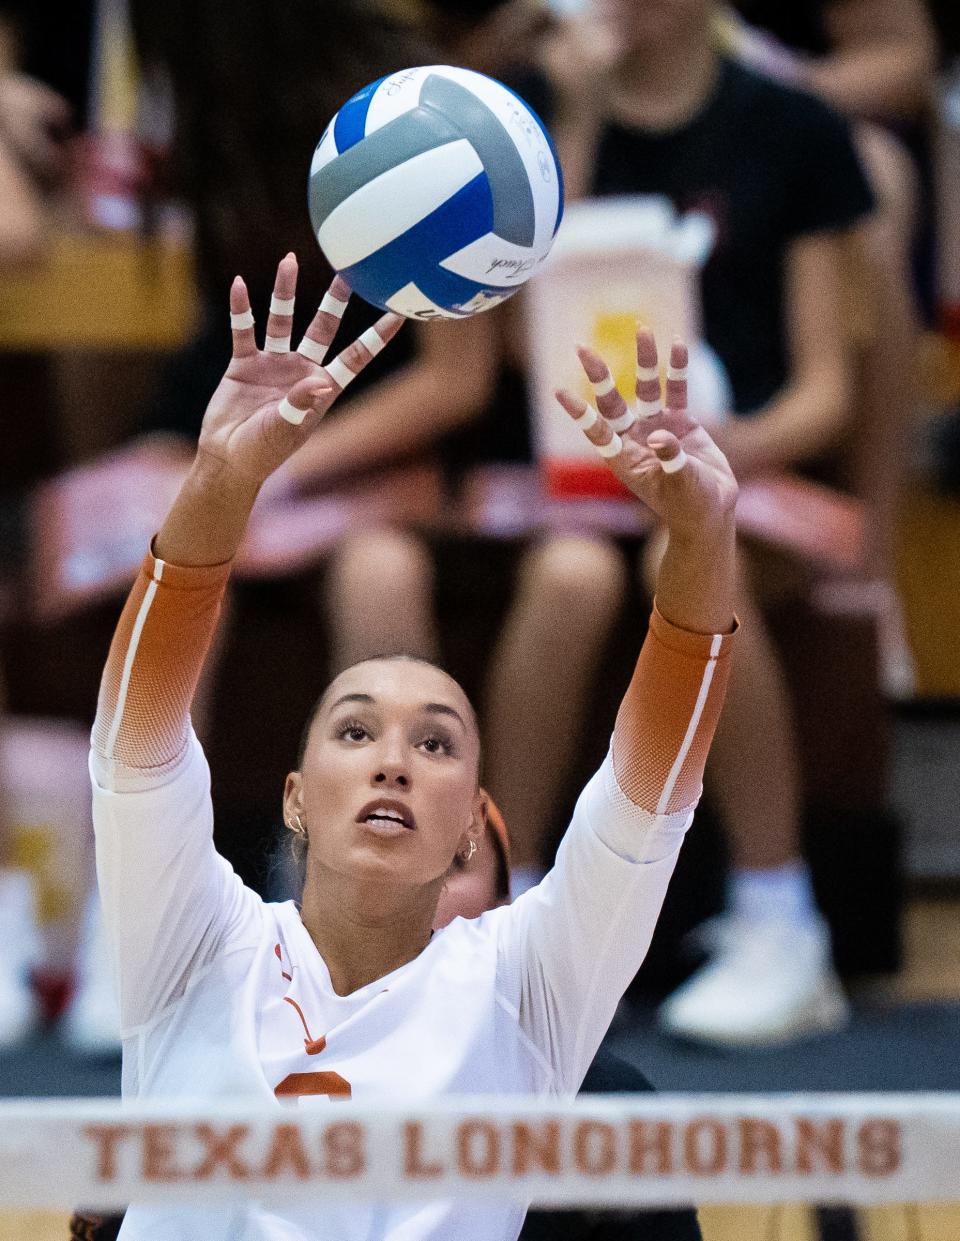 Texas outside hitter Madisen Skinner passes the ball during the Longhorns' Orange and White Game in August. Skinner and the Longhorns rebounded from a season-opening loss at Long Beach State to pick up road wins over Loyola-Marymount and No. 5 Minnesota.